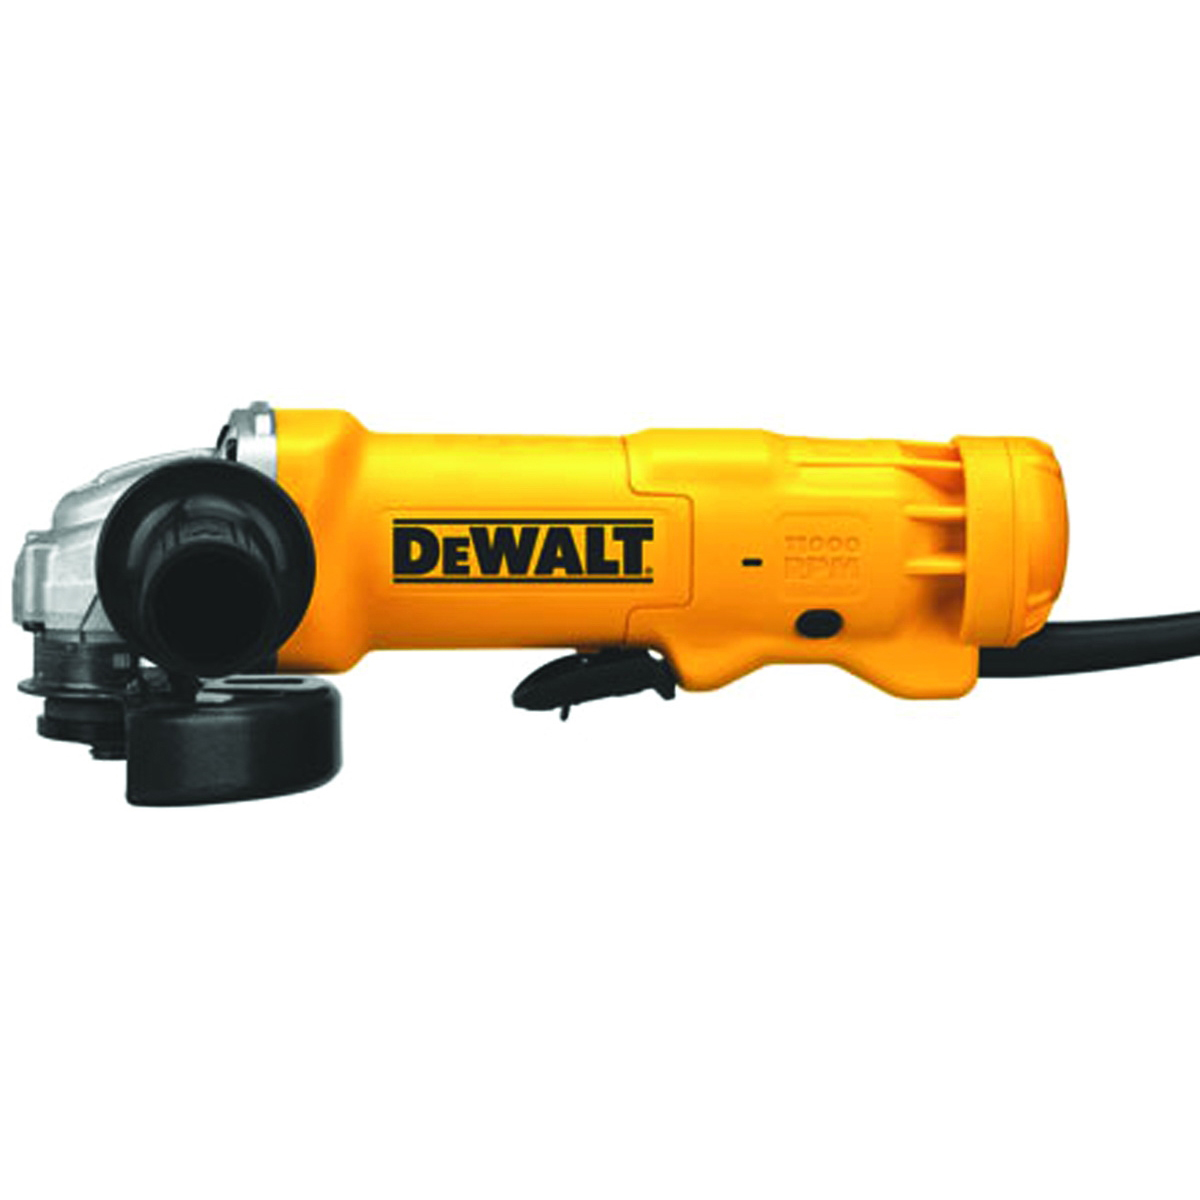 DeWALT DWE402 Small Angle Grinder, 11 A, 5/8-11 Spindle, 4-1/2 in Dia Wheel, 11,000 rpm Speed - 5